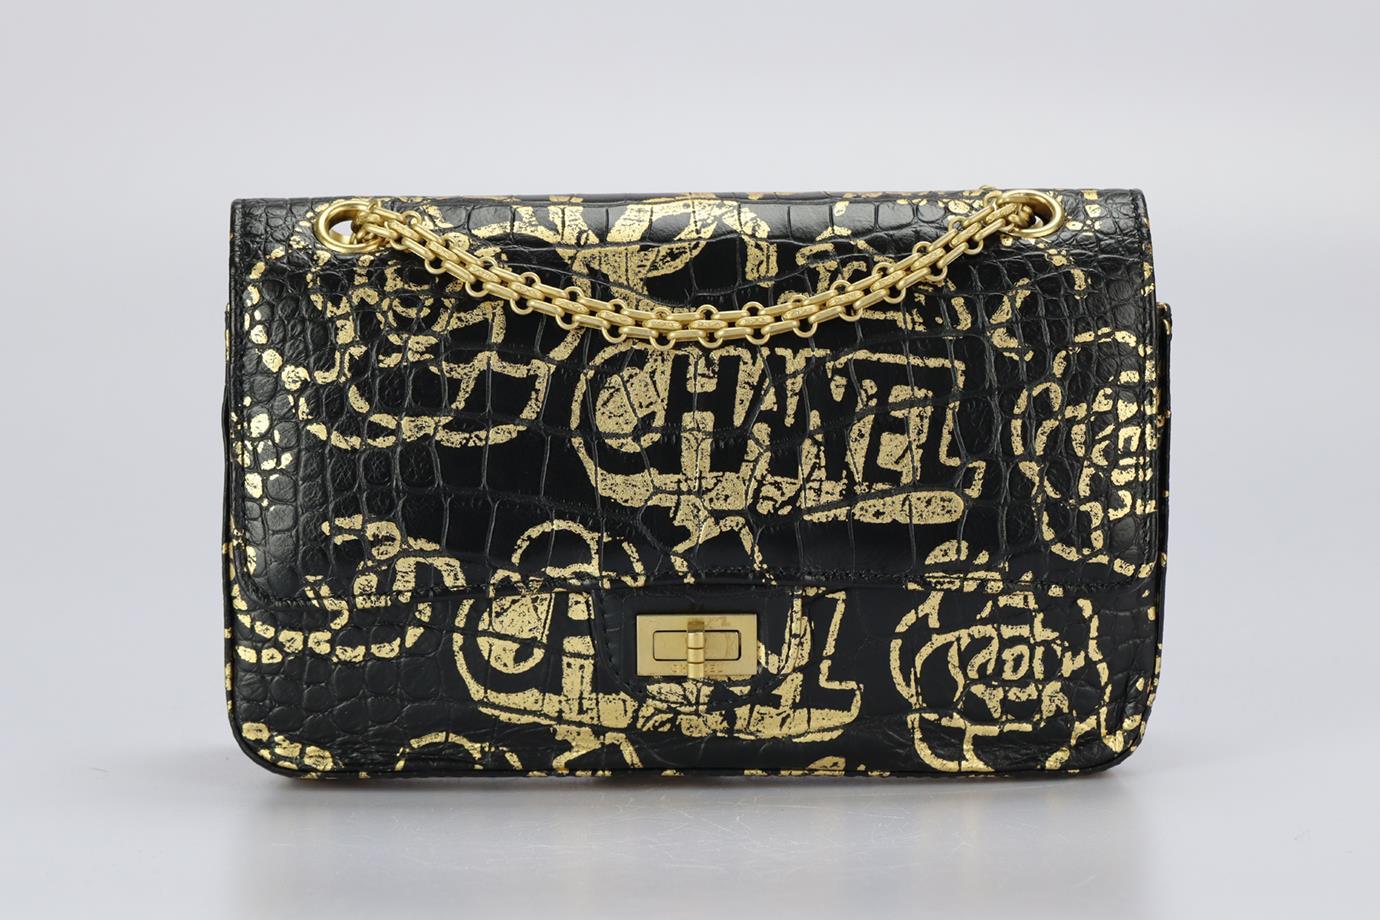 Chanel 2019 Reissue 2.55 Medium Double Flap Printed Croc Effect Leather Shoulder Bag. Gold and black. Twist lock fastening - Front. Comes with - dustbag and authenticity card. Height: 6.1 in. Width: 10 in. Depth: 2 in. Handle drop: 11.2 in. Strap